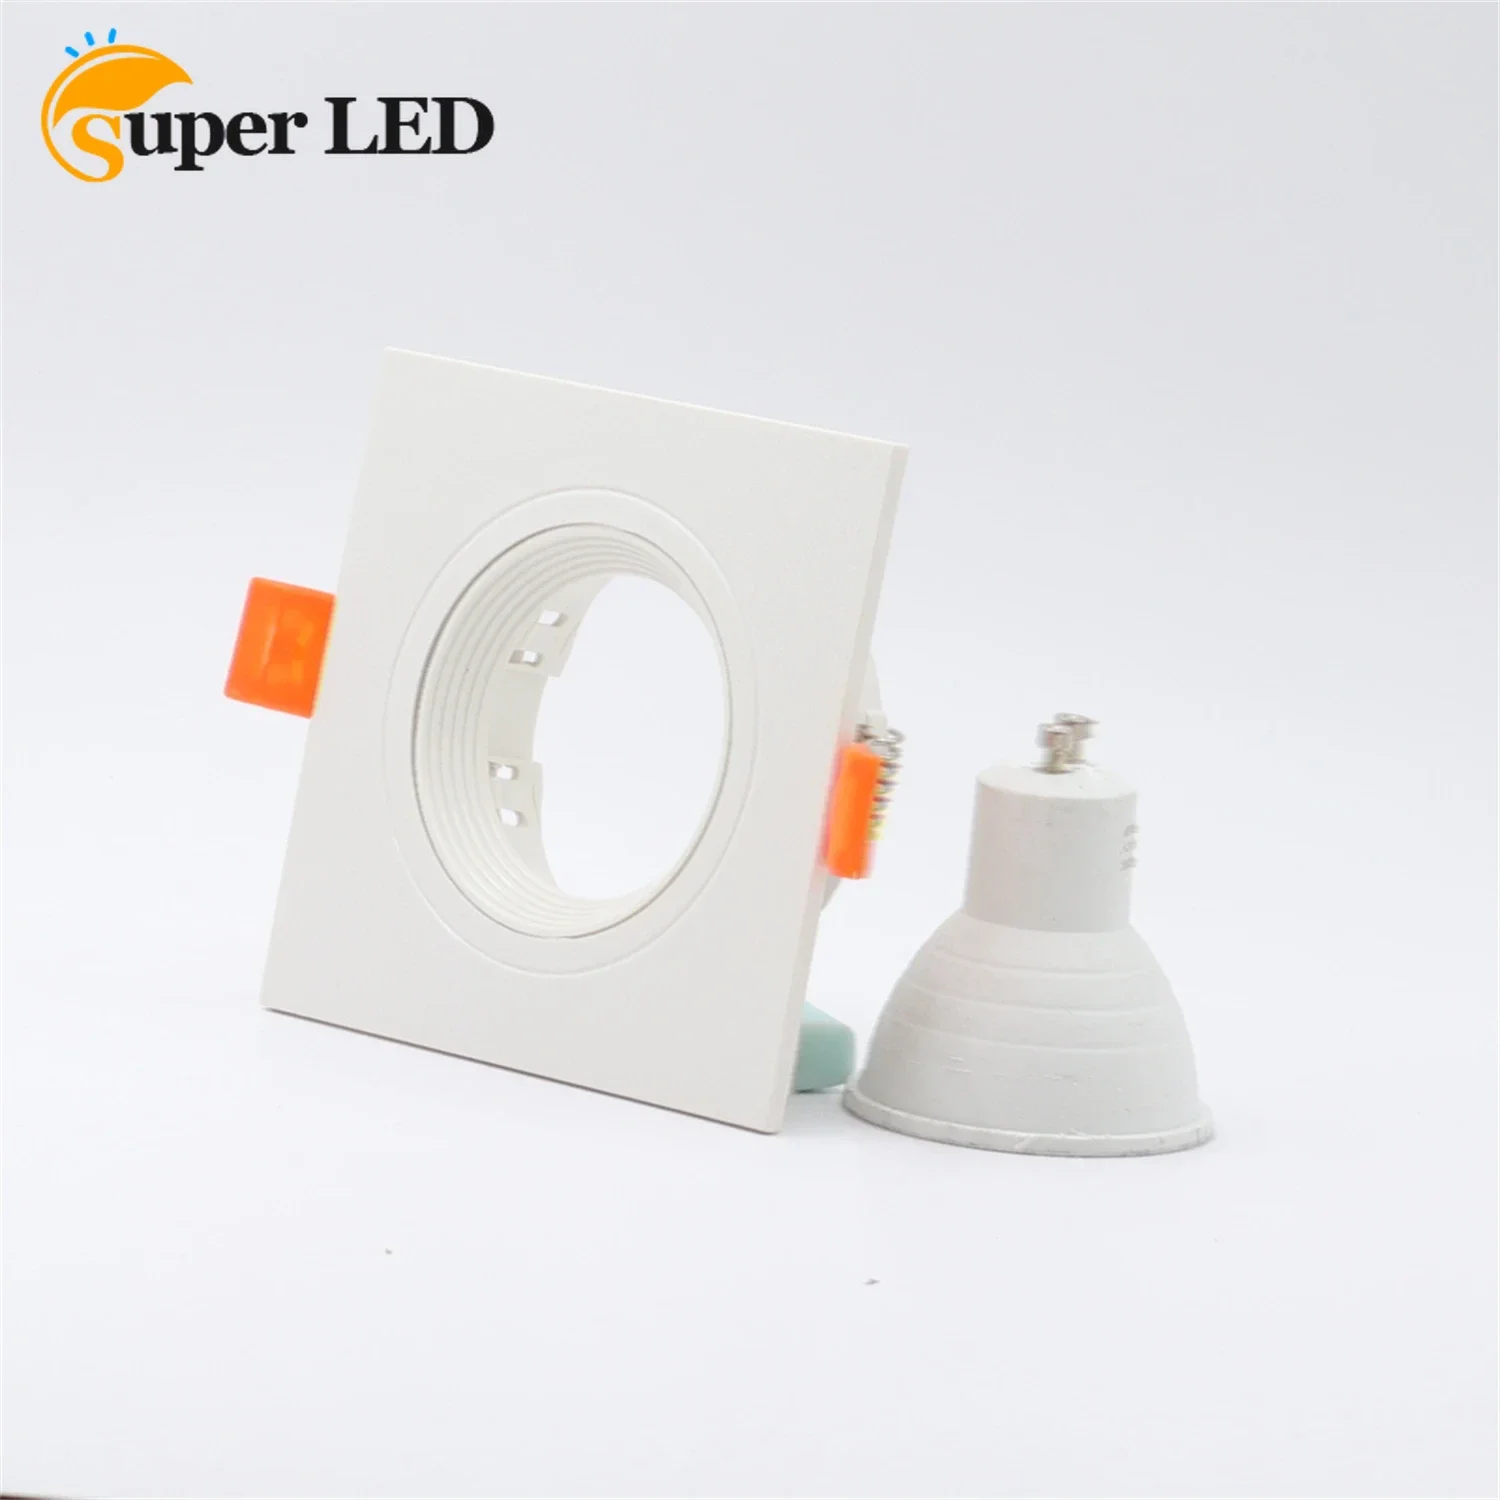 

Round Gu10 Spot Bulb Recessed Led Ceiling Light Fixture Downlight MR16 Fitting Mounting Ceiling Spot Lights Frame